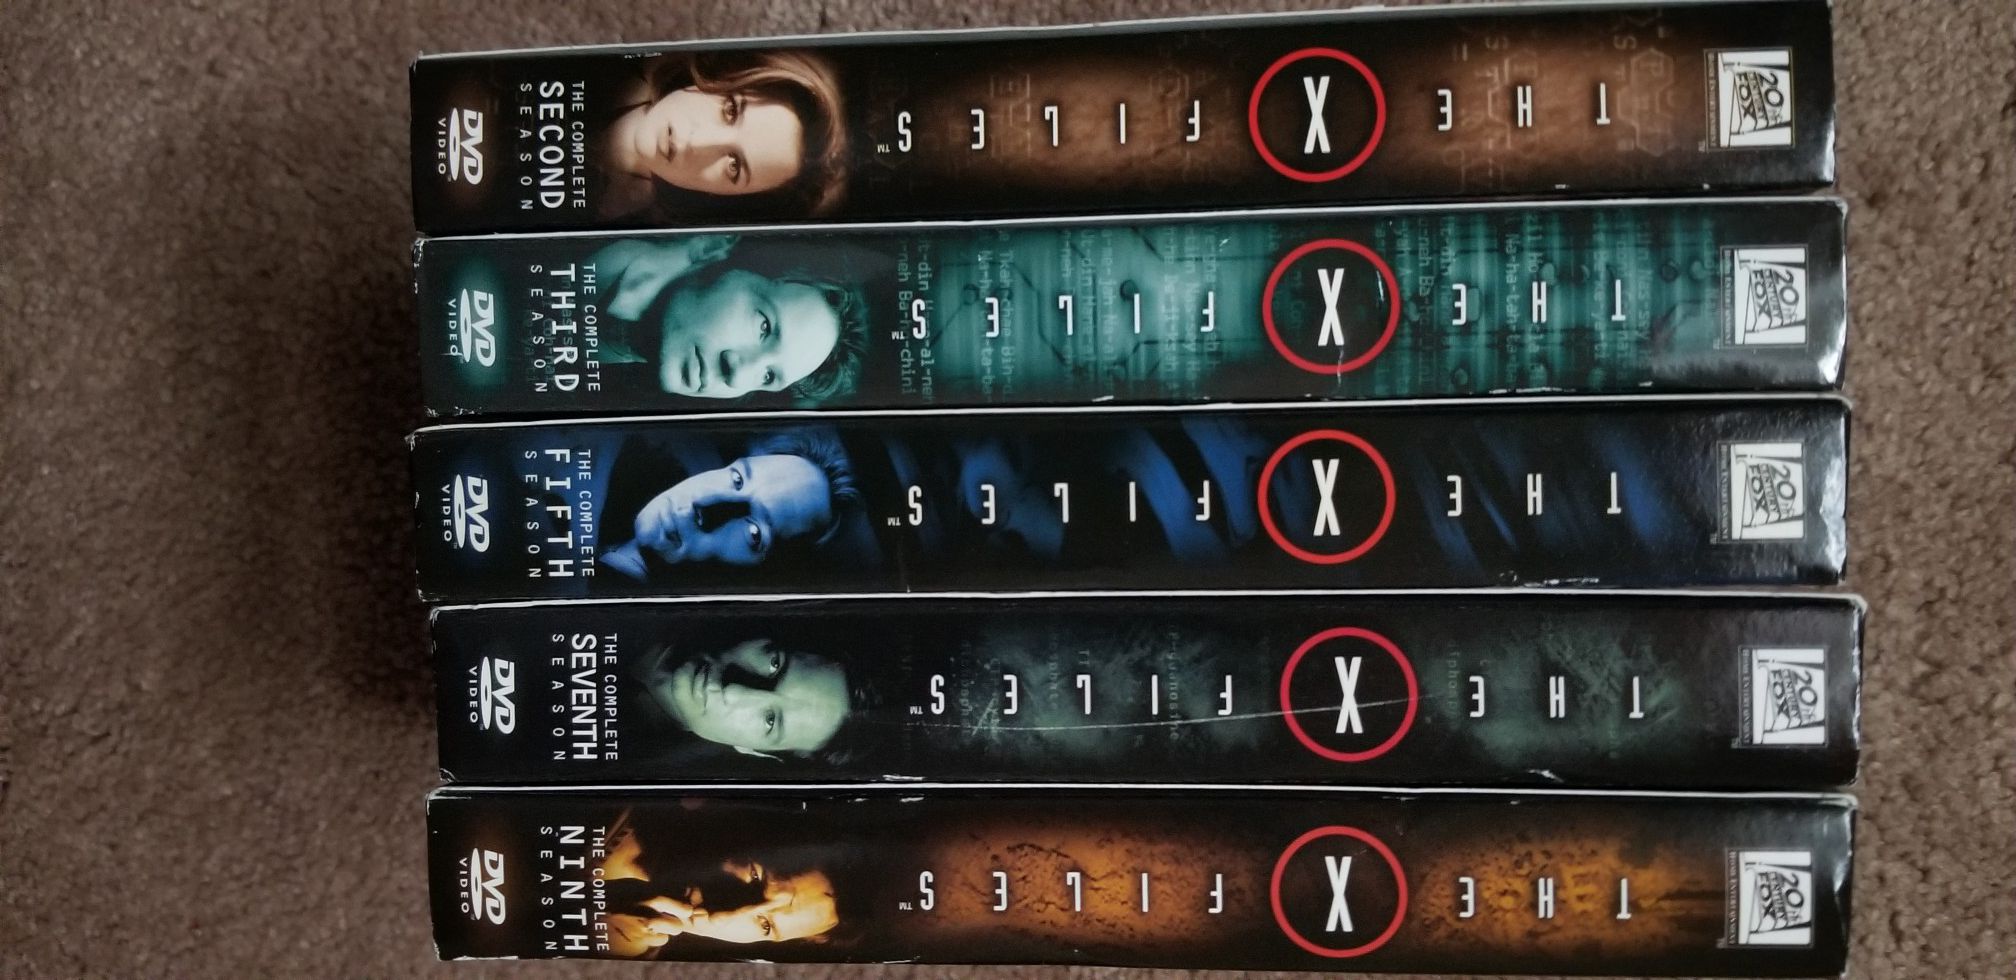 The X files series season 2, 3, 5, 7 and 9, in good condition